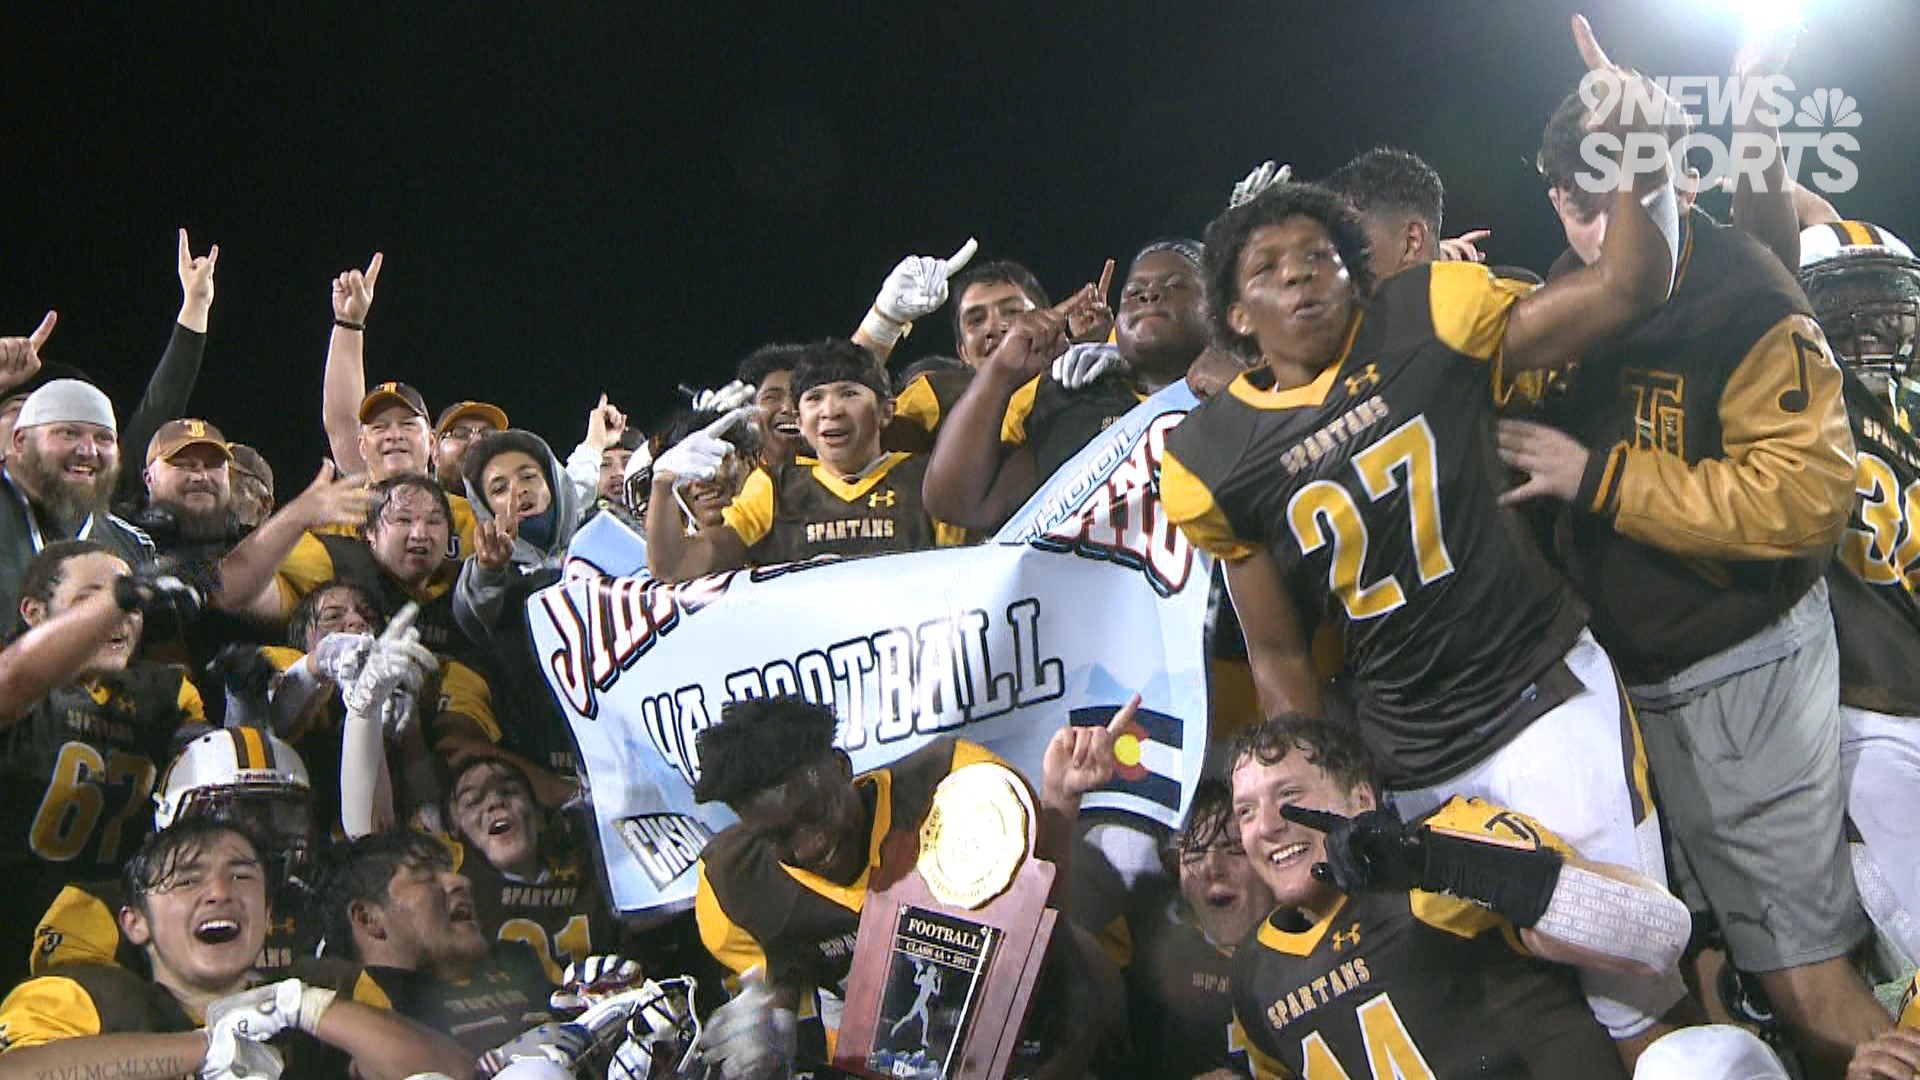 The Spartans edged Gateway 28-27 to capture their first state title since 1989 on Friday night.